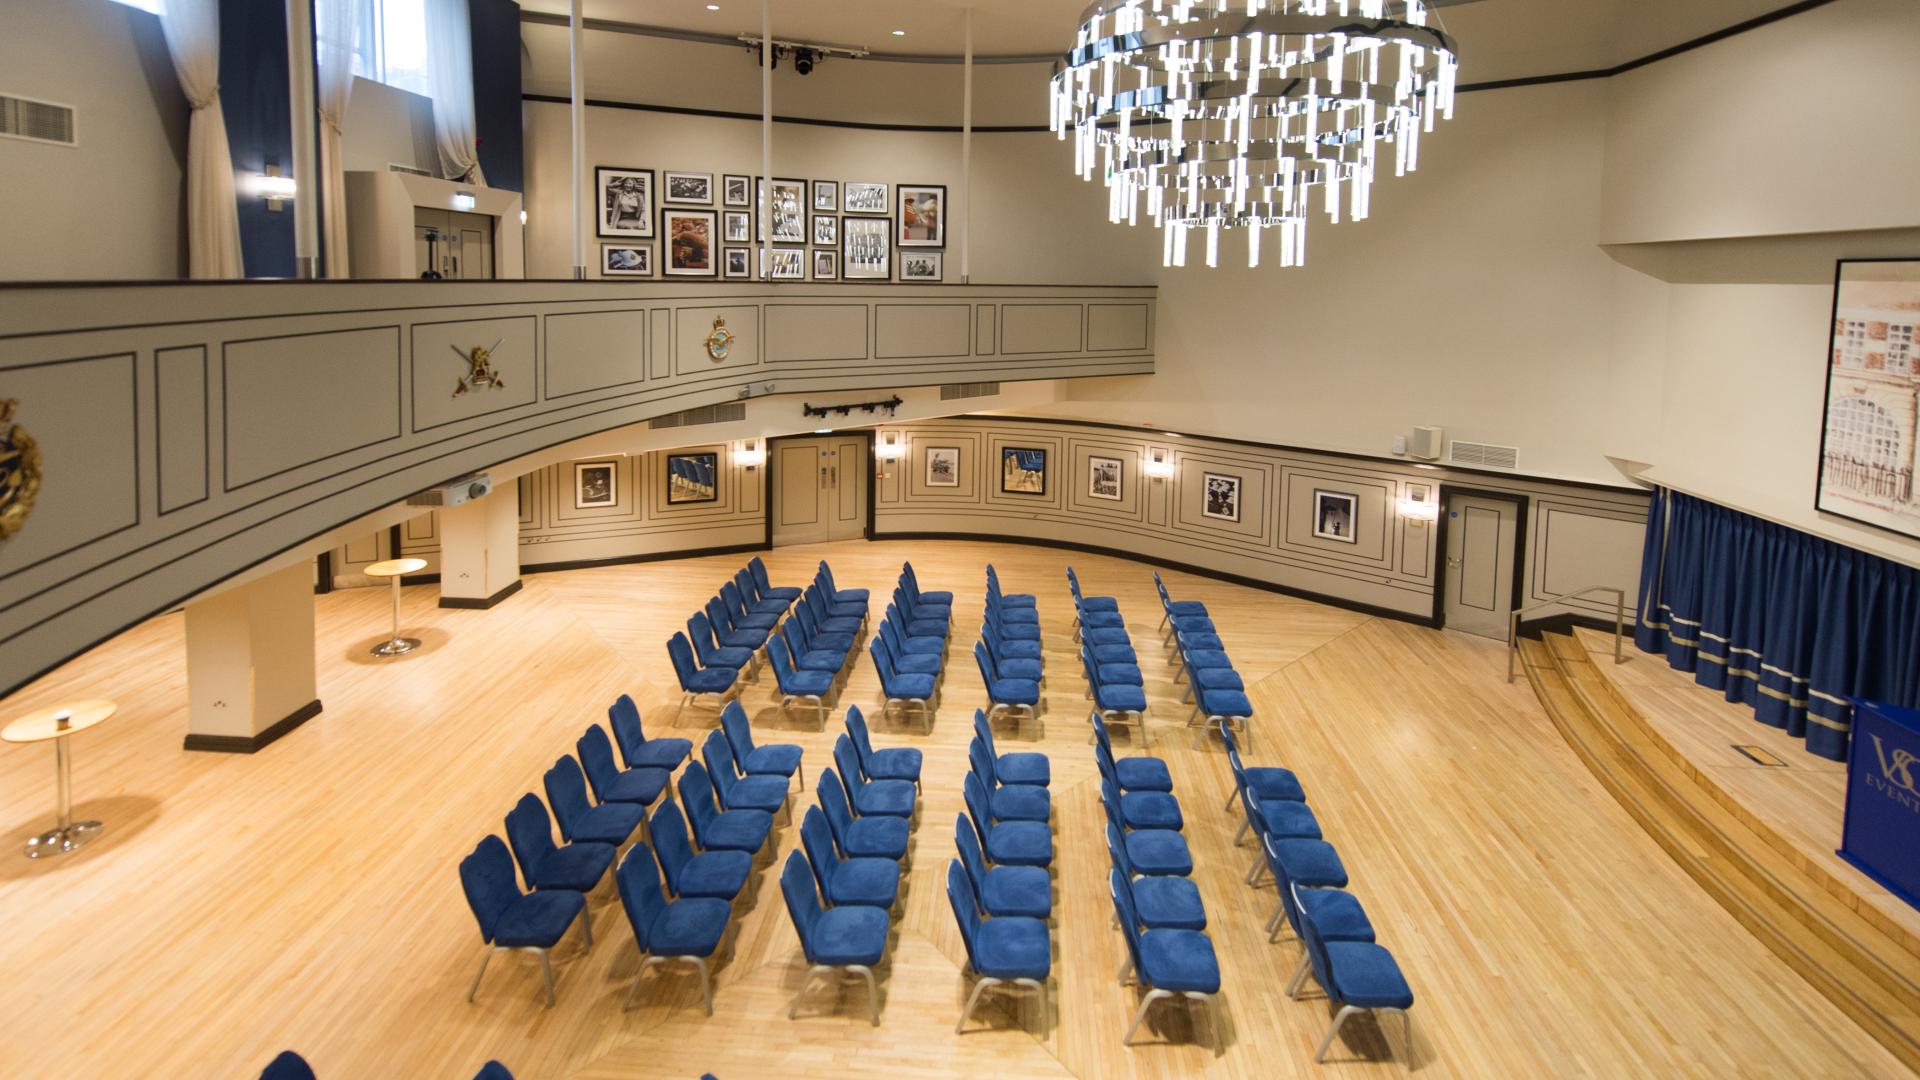 Conference Venues for Hire in London